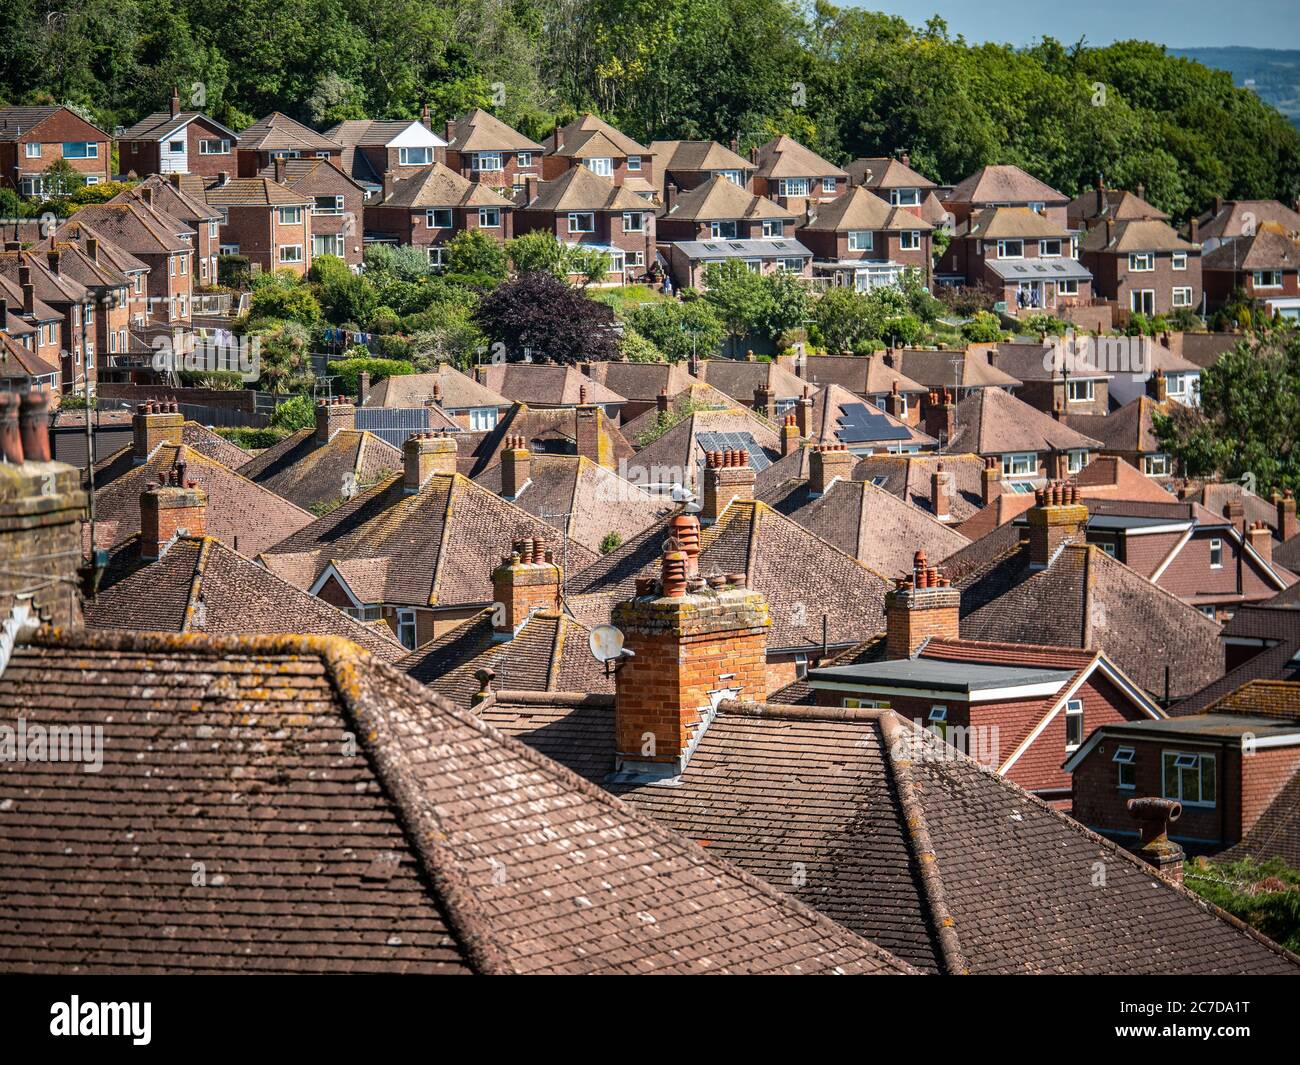 Suburban Rooftops. A view over the a post-war 1950's English housing estate on the fringes of Eastbourne backed by green belt ancient woodland. Stock Photo